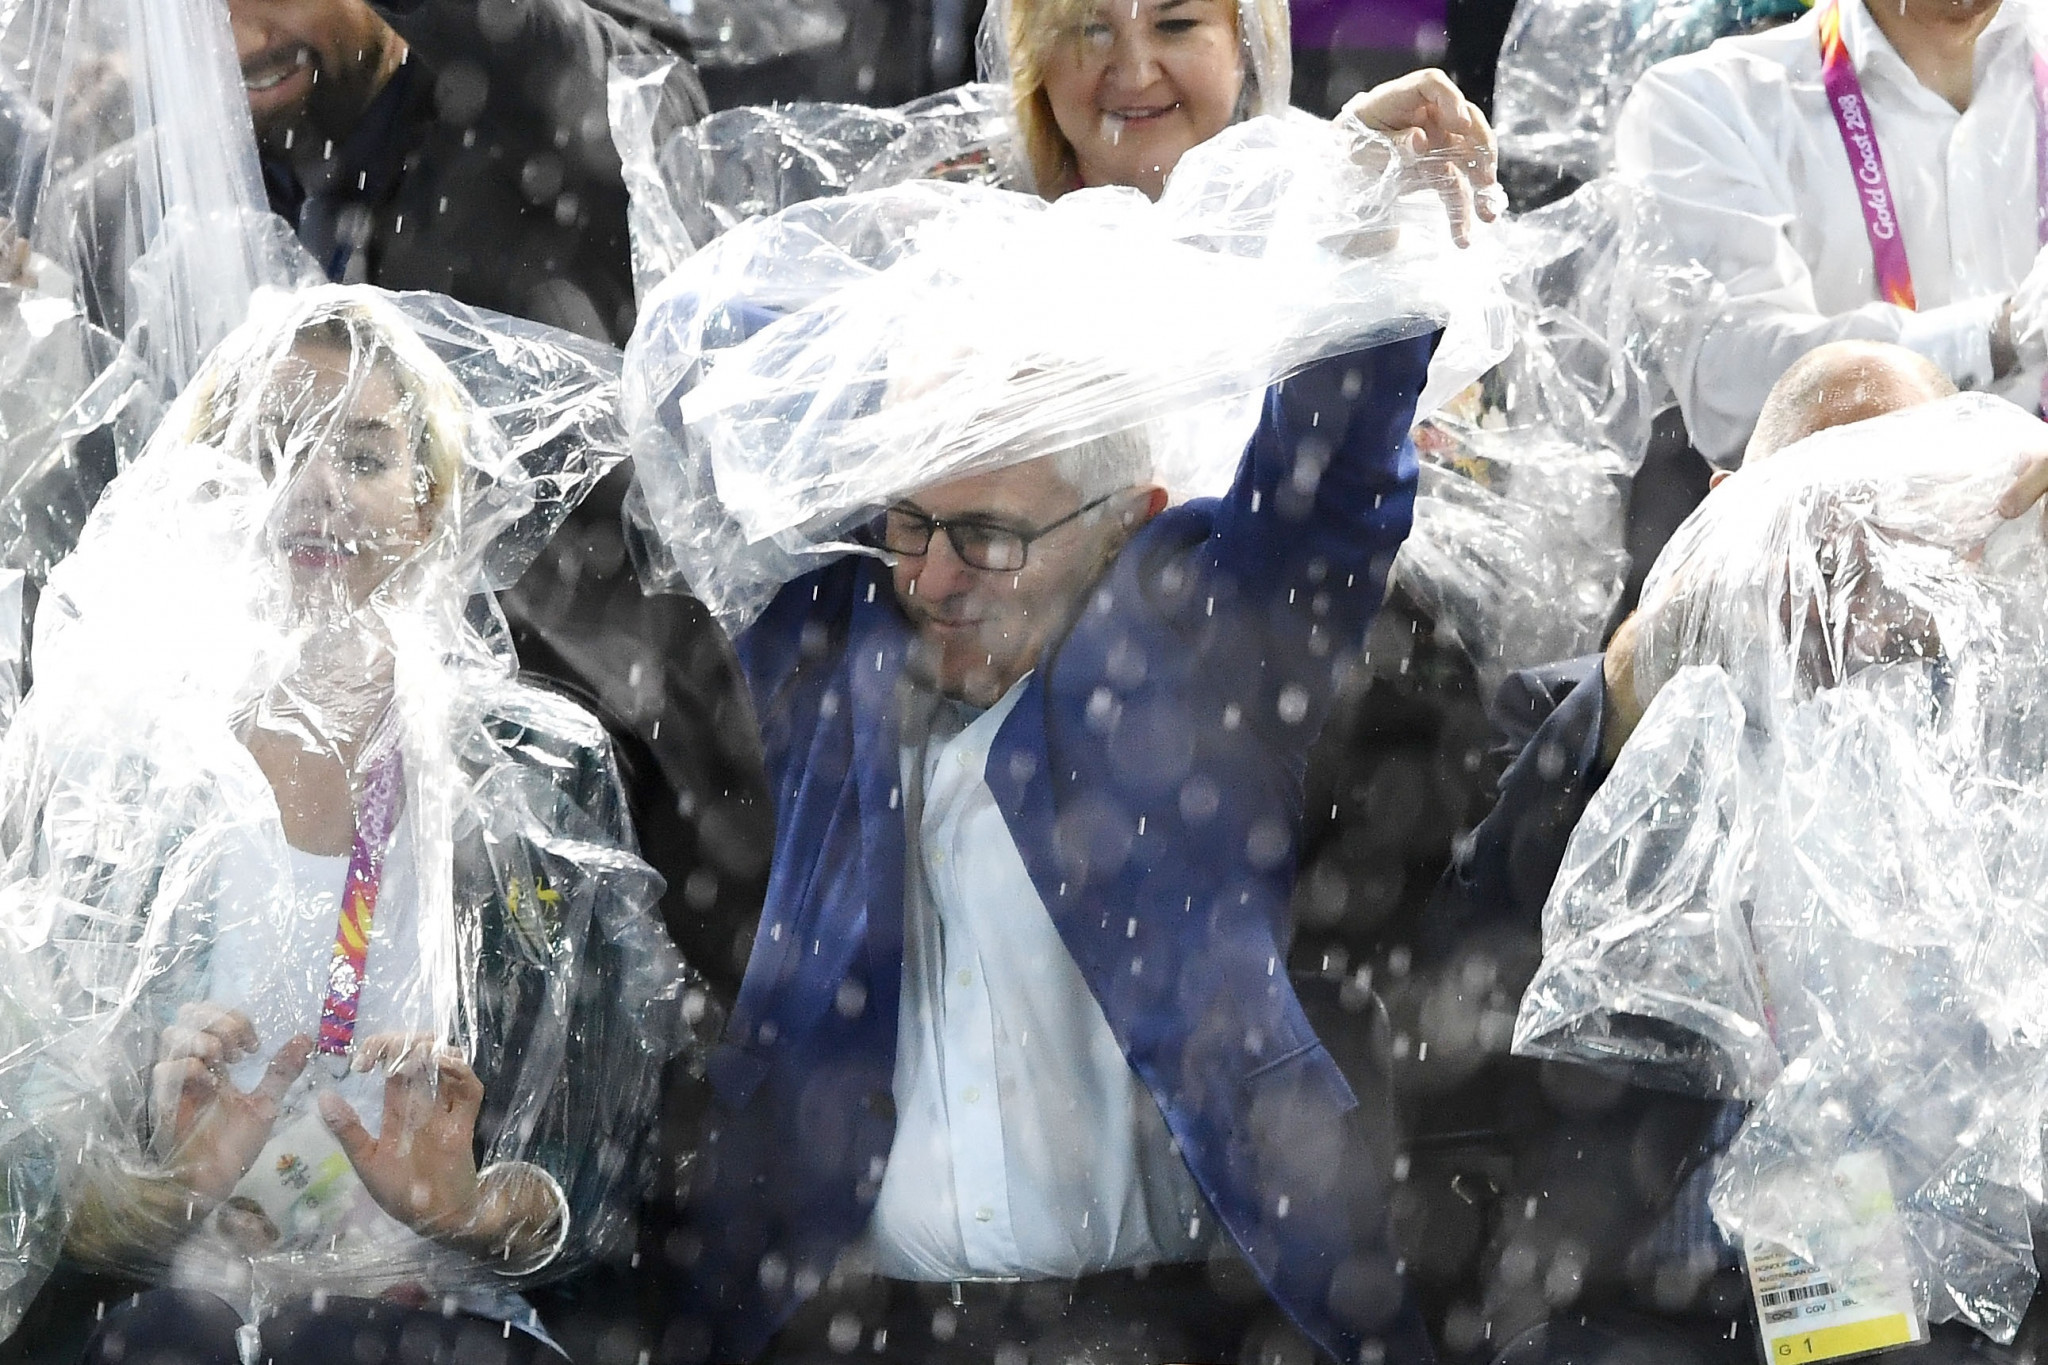 Australia's Prime Minister Malcolm Turnbull was among the spectators on a wet night at the Optus Aquatics Centre ©Getty Images